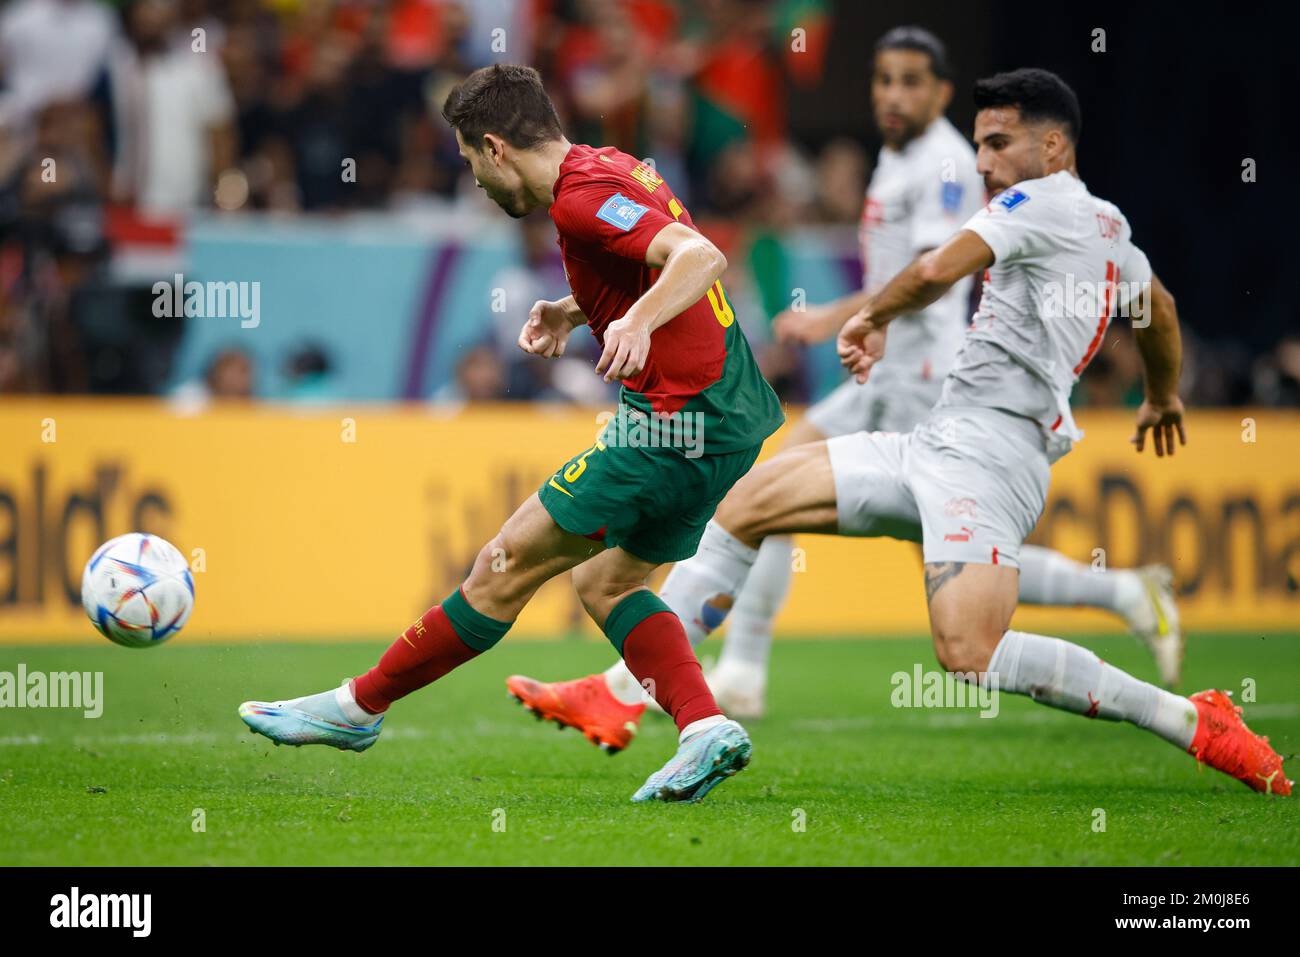 Lusail, Catar. 06th Dec, 2022. RAPHAEL GUERREIRO of Portugal kicks to score his goal during the match between Portugal vs Su? a, valid for the Round of 16 of the World Cup, held at the Lusail National Stadium in Lusail, Qatar. Credit: Rodolfo Buhrer/La Imagem/FotoArena/Alamy Live News Stock Photo